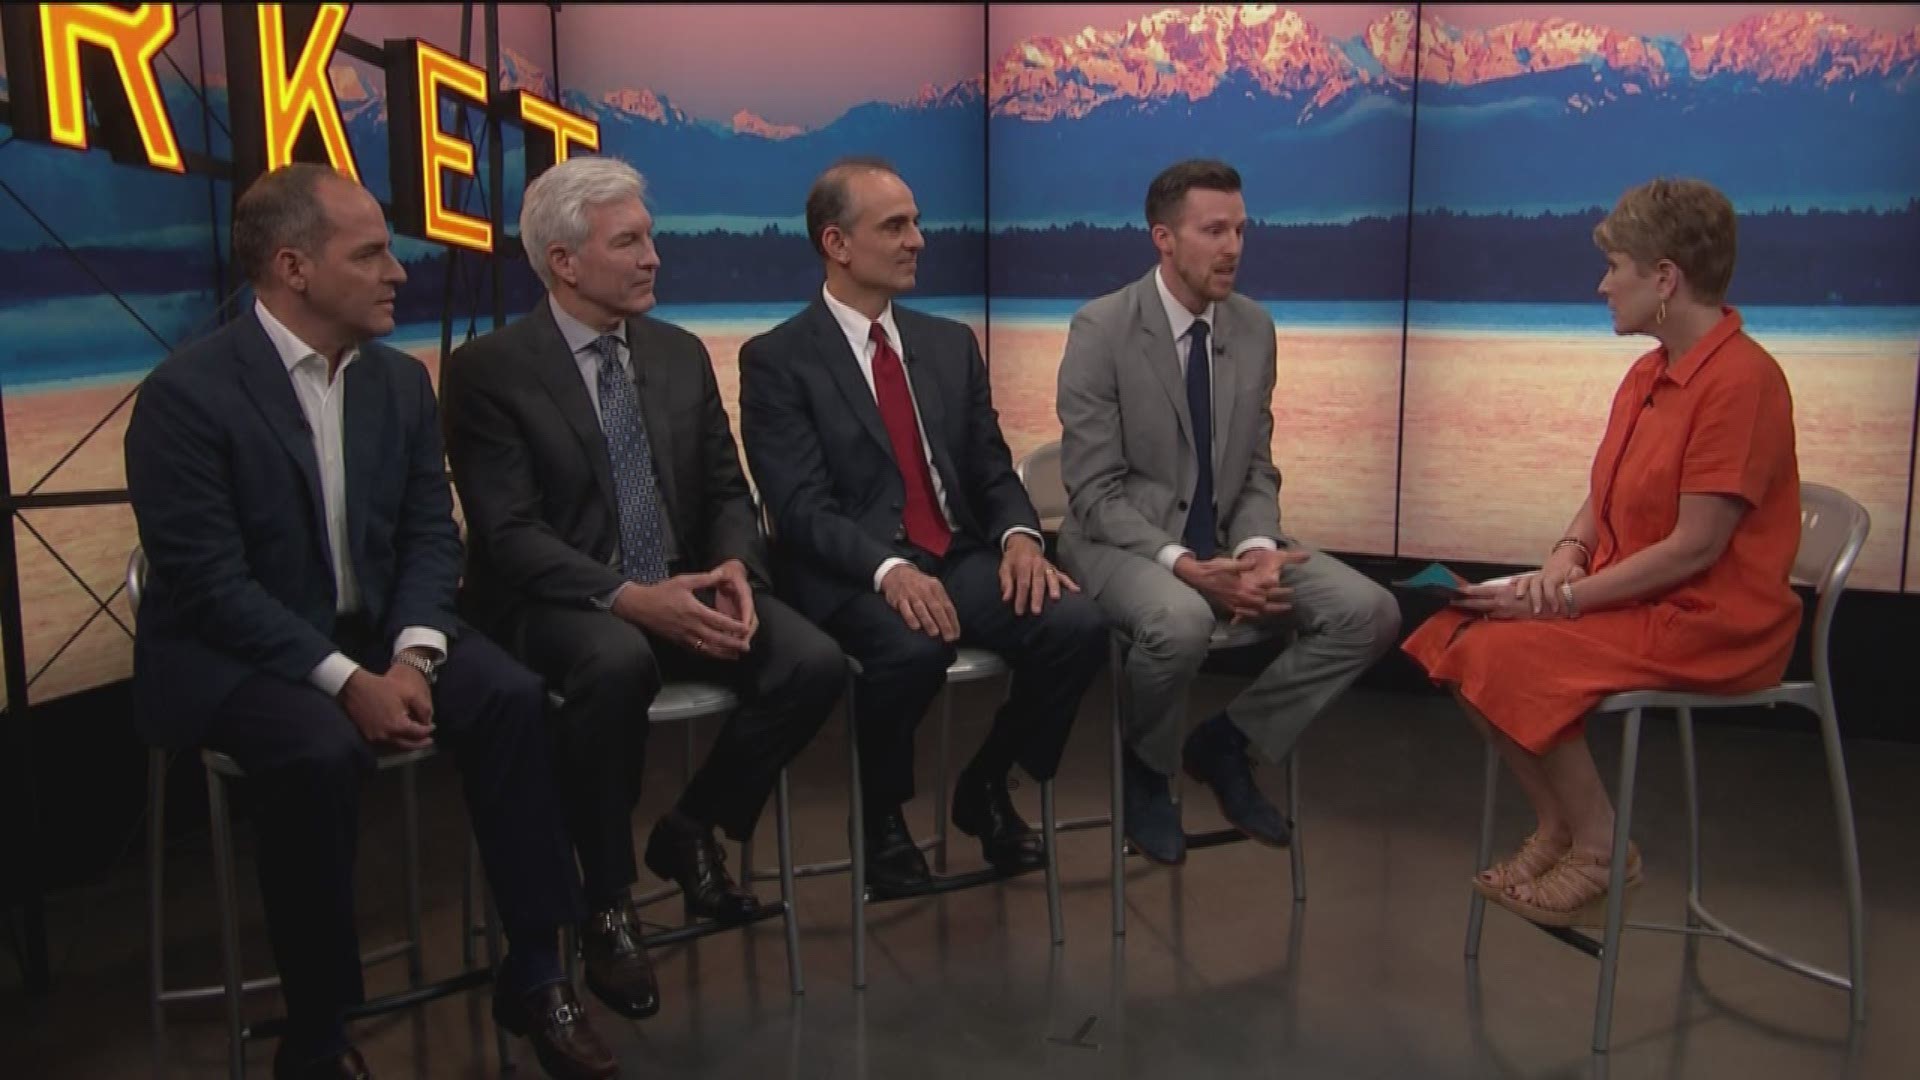 Doctor Jordan Collier from Evergreen Health, Doctor Timothy Panah from Skinny Seattle, Doctor Robert Niedbalski from Northwest Hair Restoration and Doctor Steven Stanos from Swedish join New Day's Wellness Panel to answer questions on summer safety, hair loss and restoration, pain management and opioids, and more.